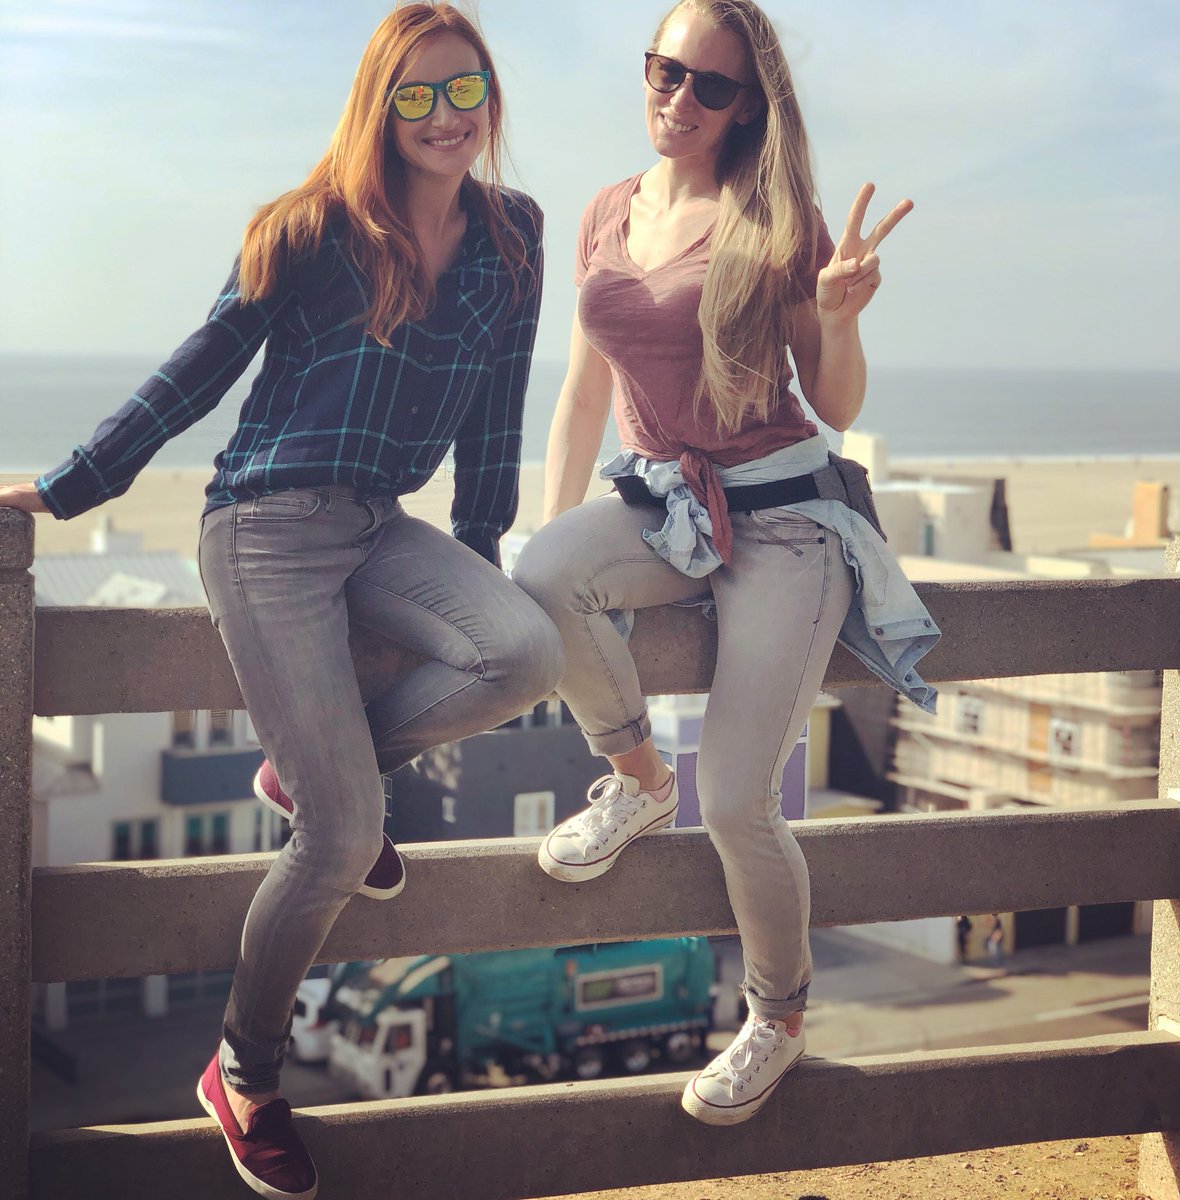 Hope everyone had a happy Thanksgiving with some special family or friend time 💜 the Ek sisters say hi! 😊 #ThanksgivingDay2018 #sisters #FamilyIsLove #redhead #blondie #SantaMonica